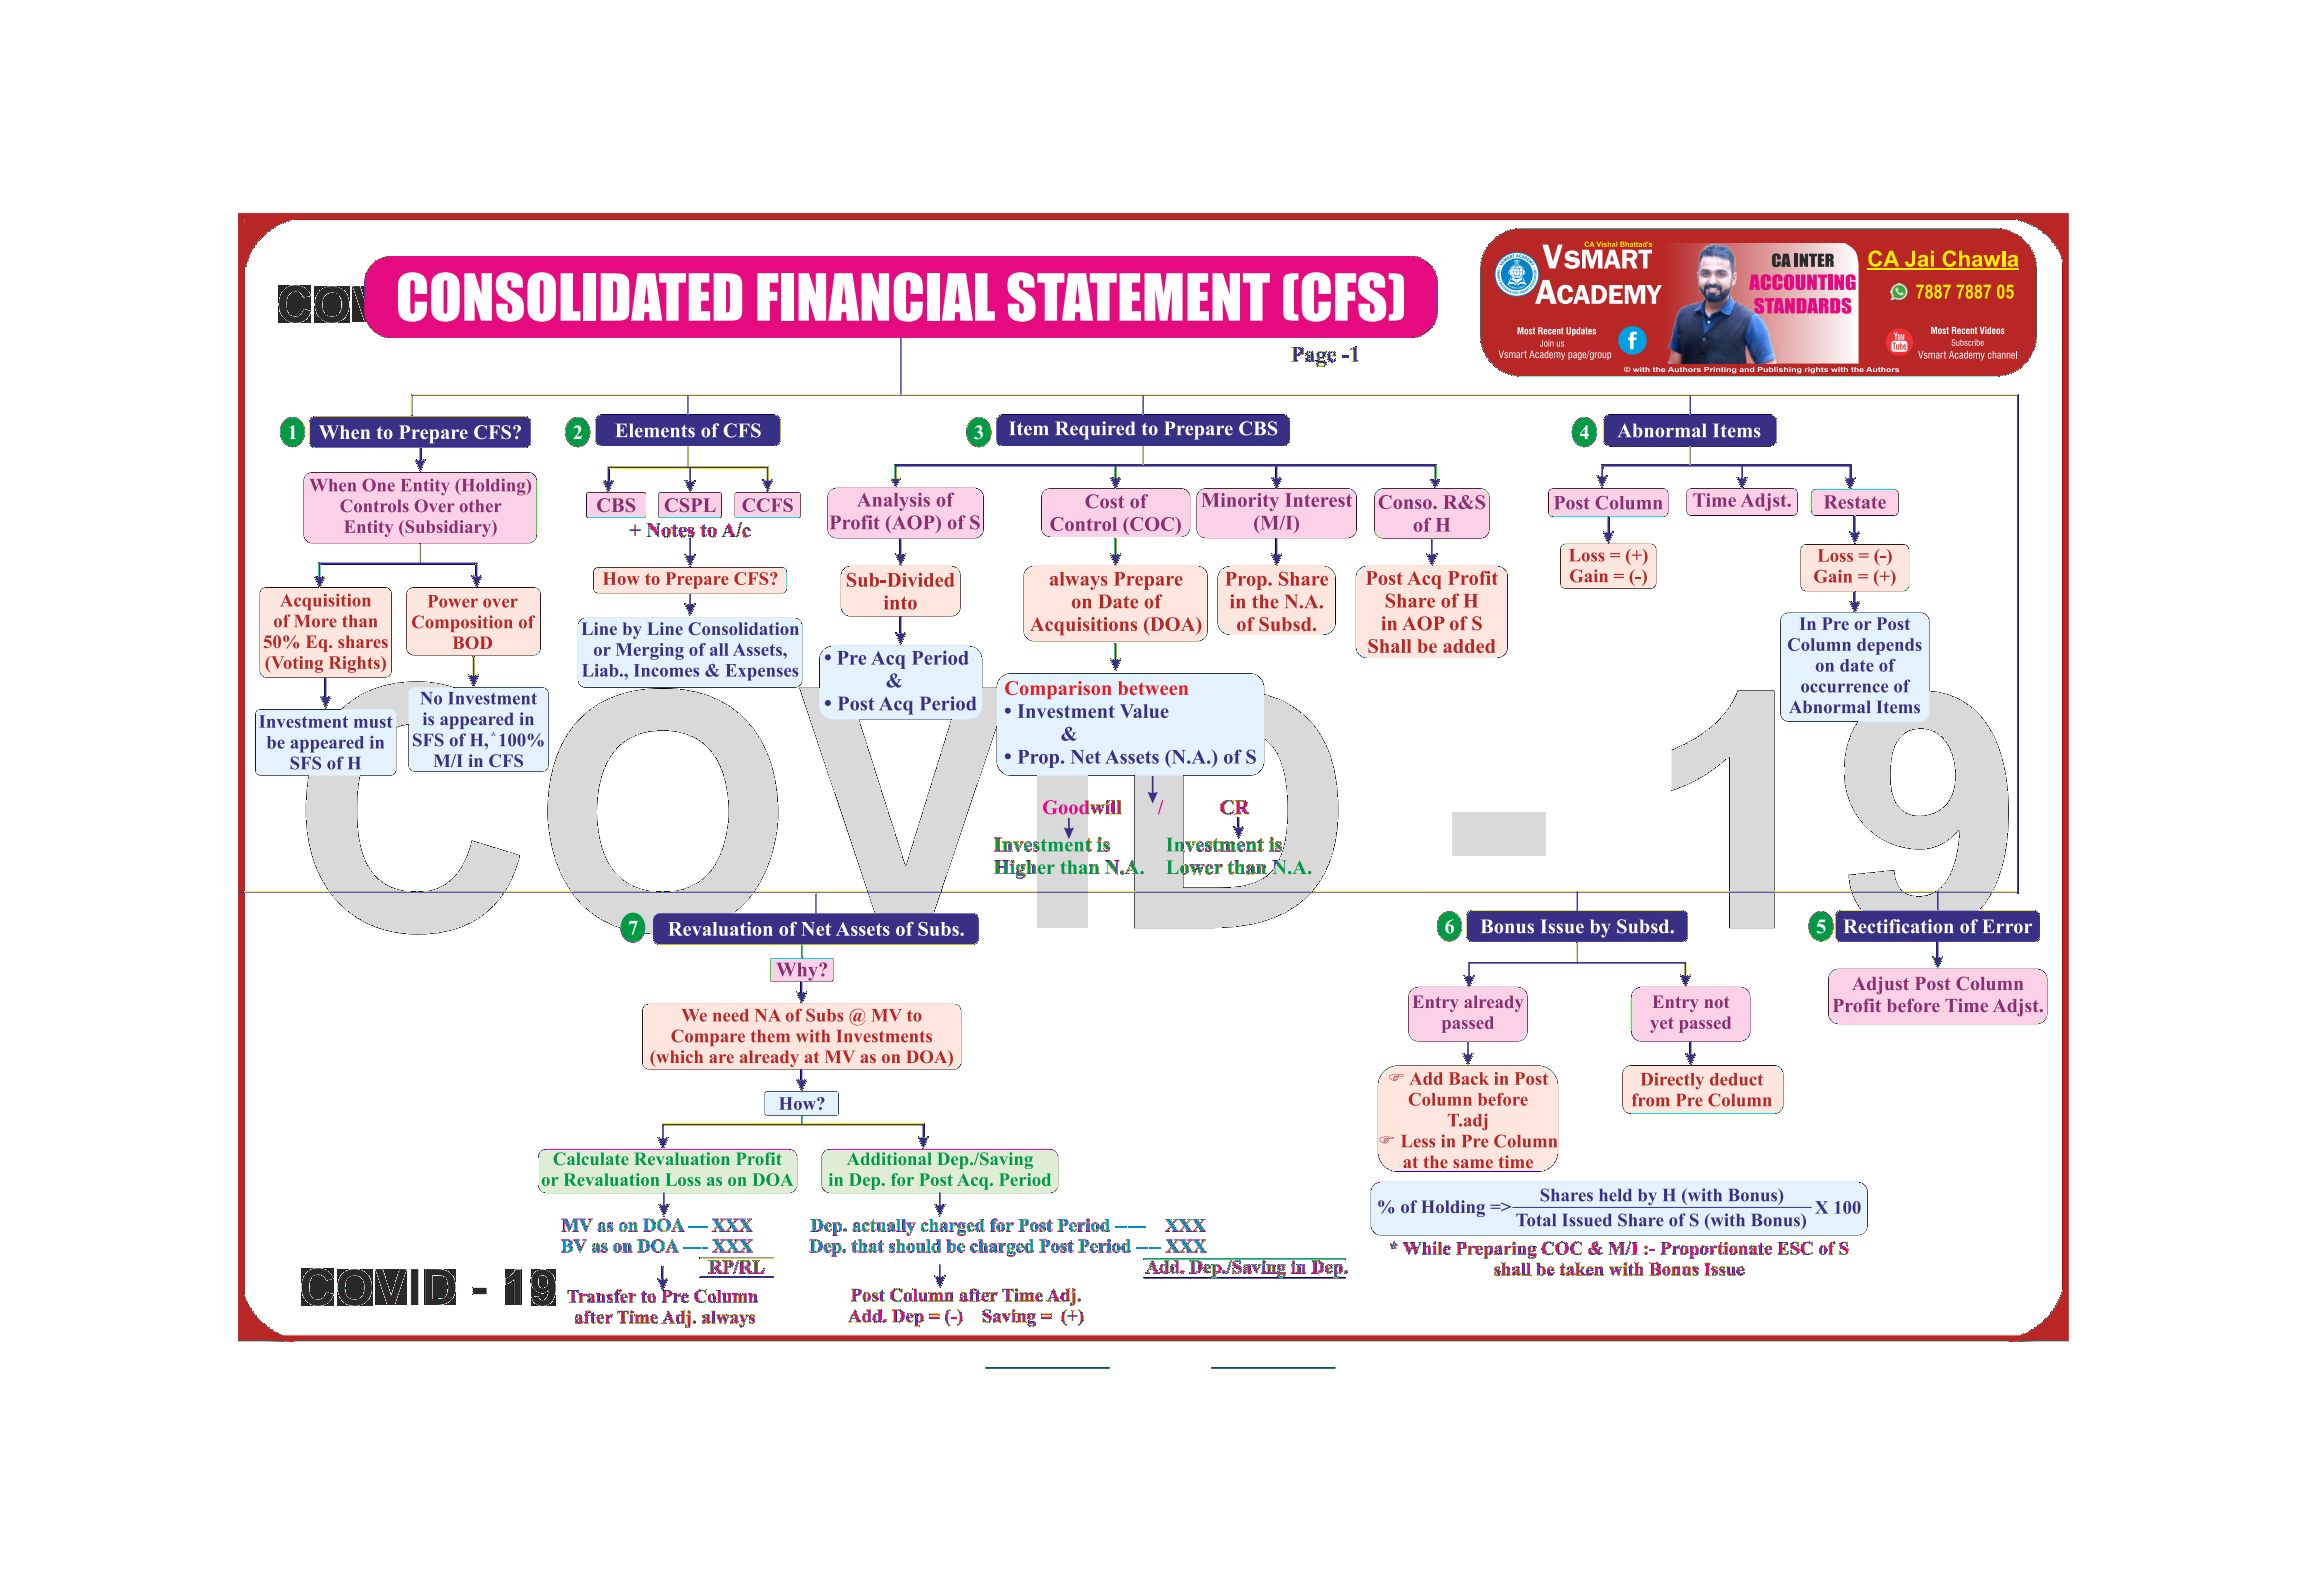 Consolidated Financial Statement Charts by CA Jay Chawla